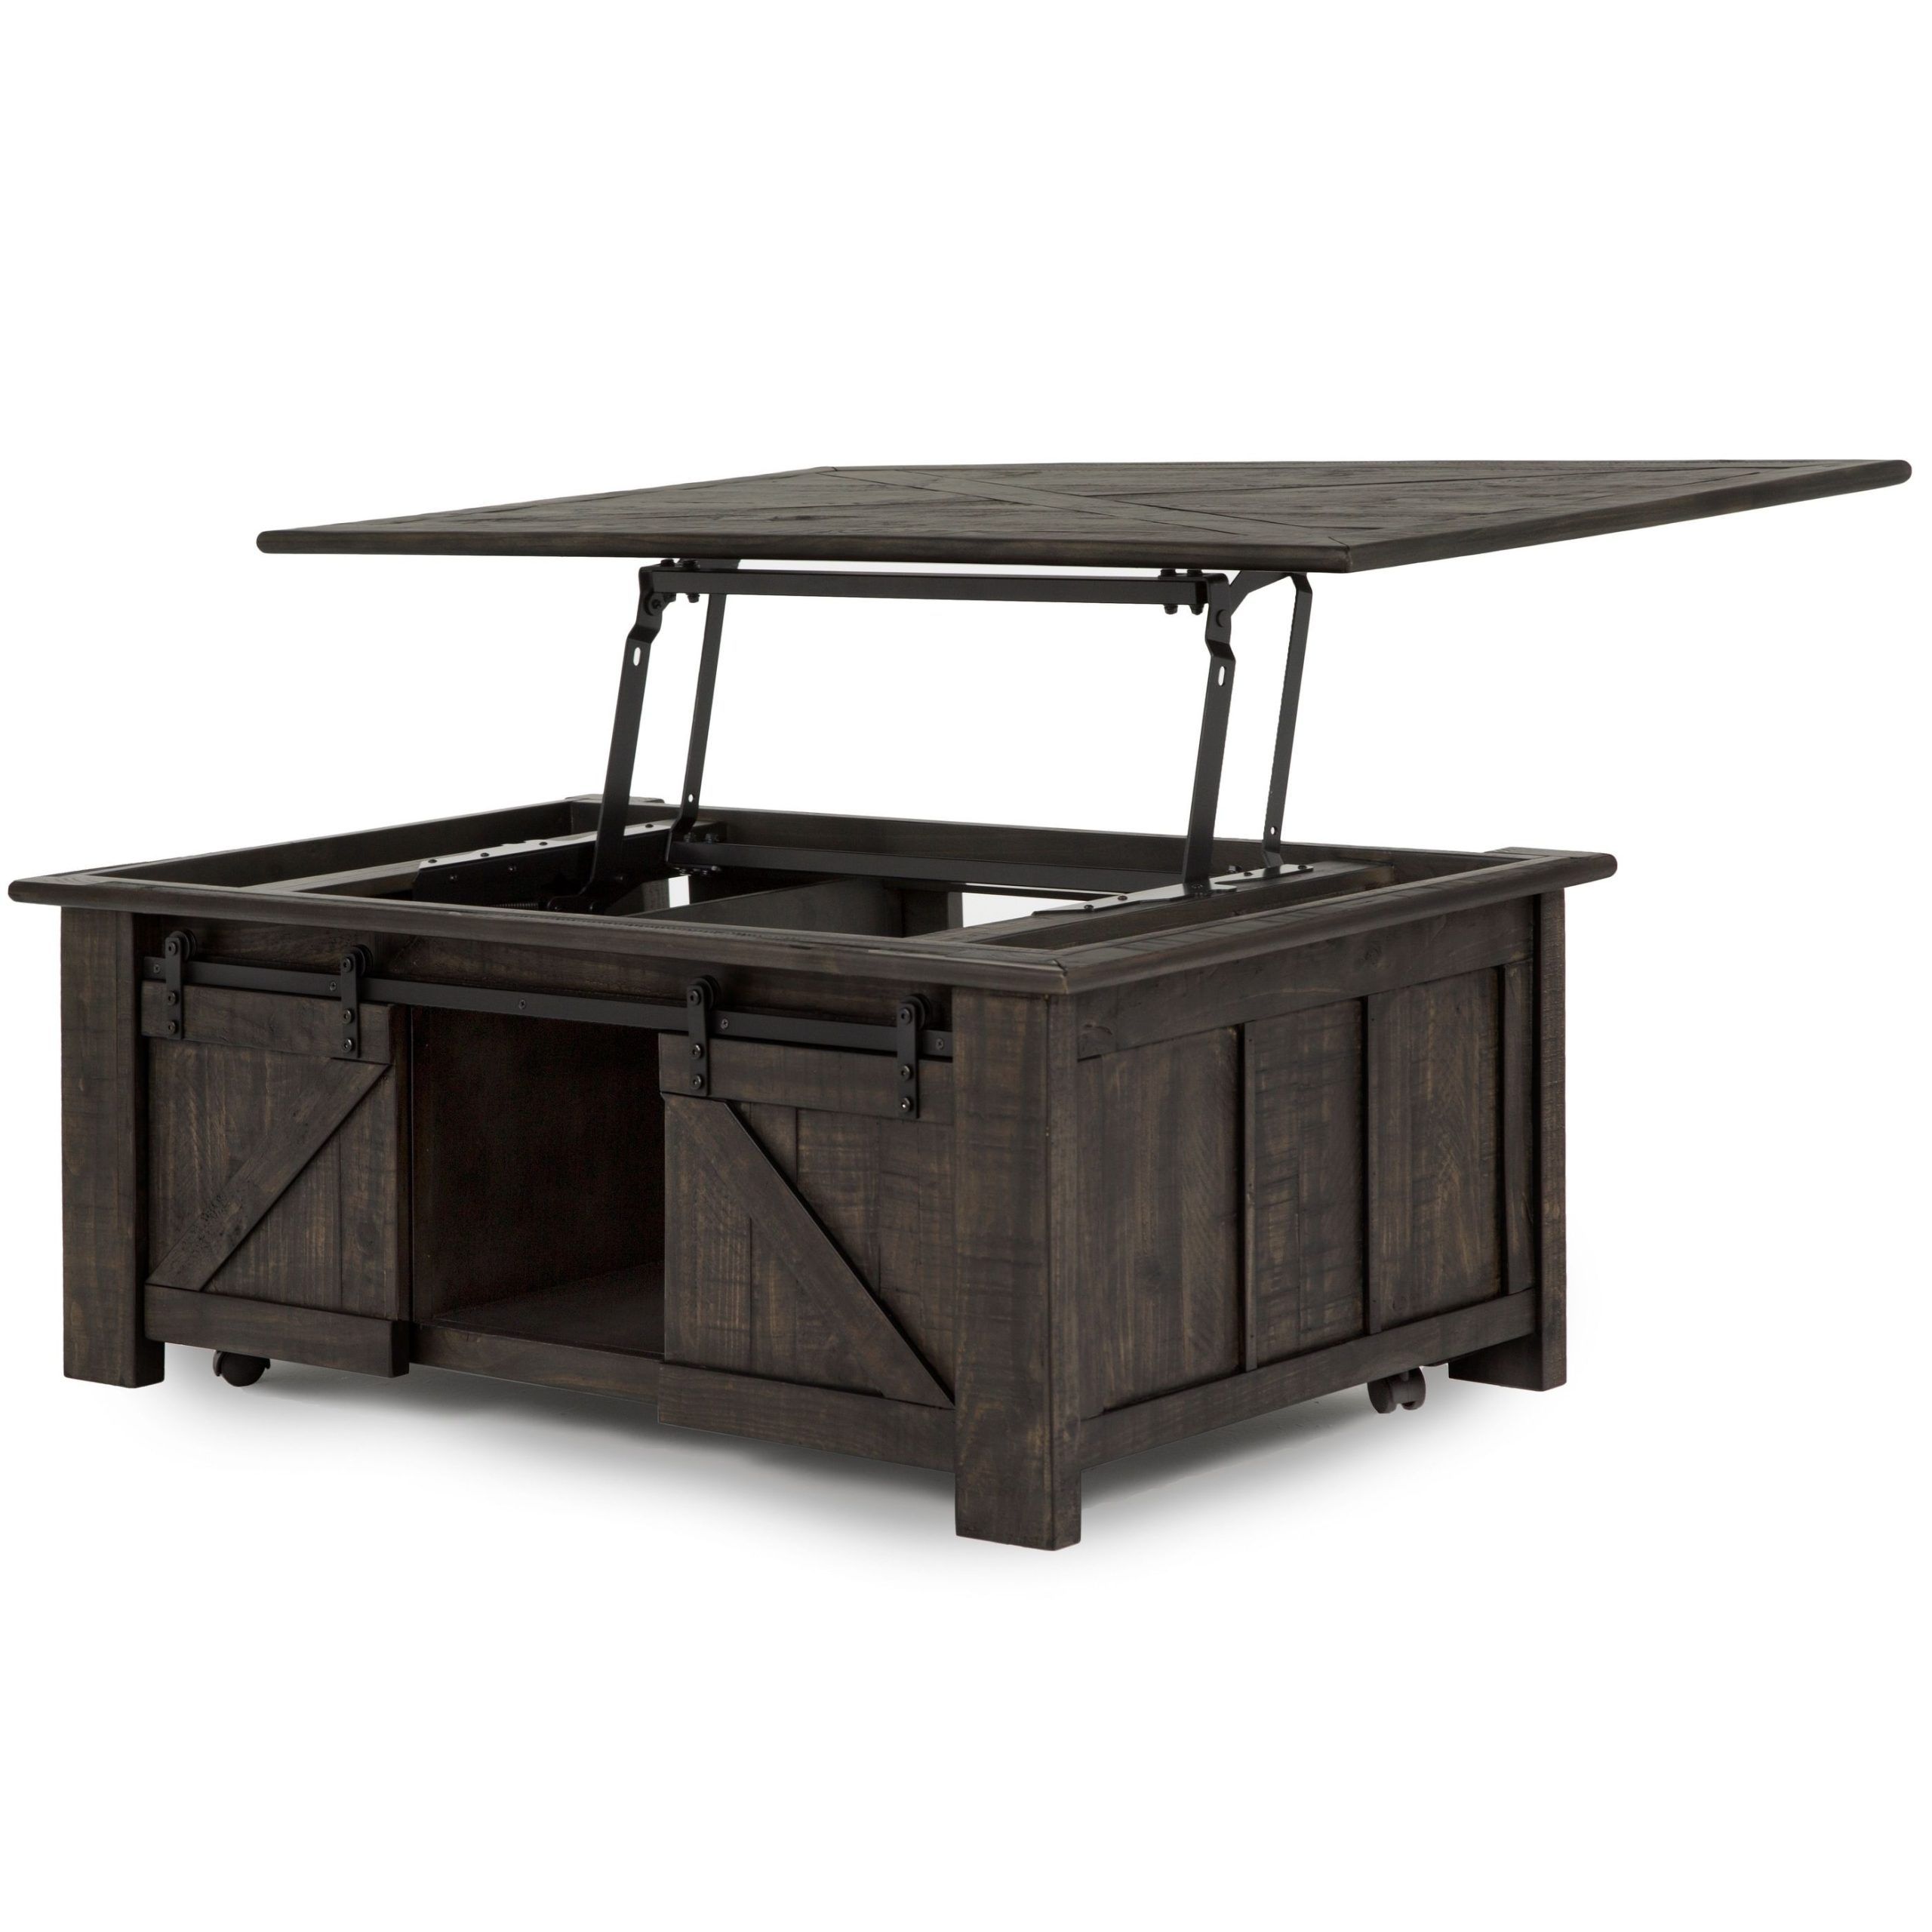 Garrett Rustic Weathered Charcoal Lift Top Sliding Door Coffee Table With Coffee Tables With Sliding Barn Doors (Gallery 9 of 20)